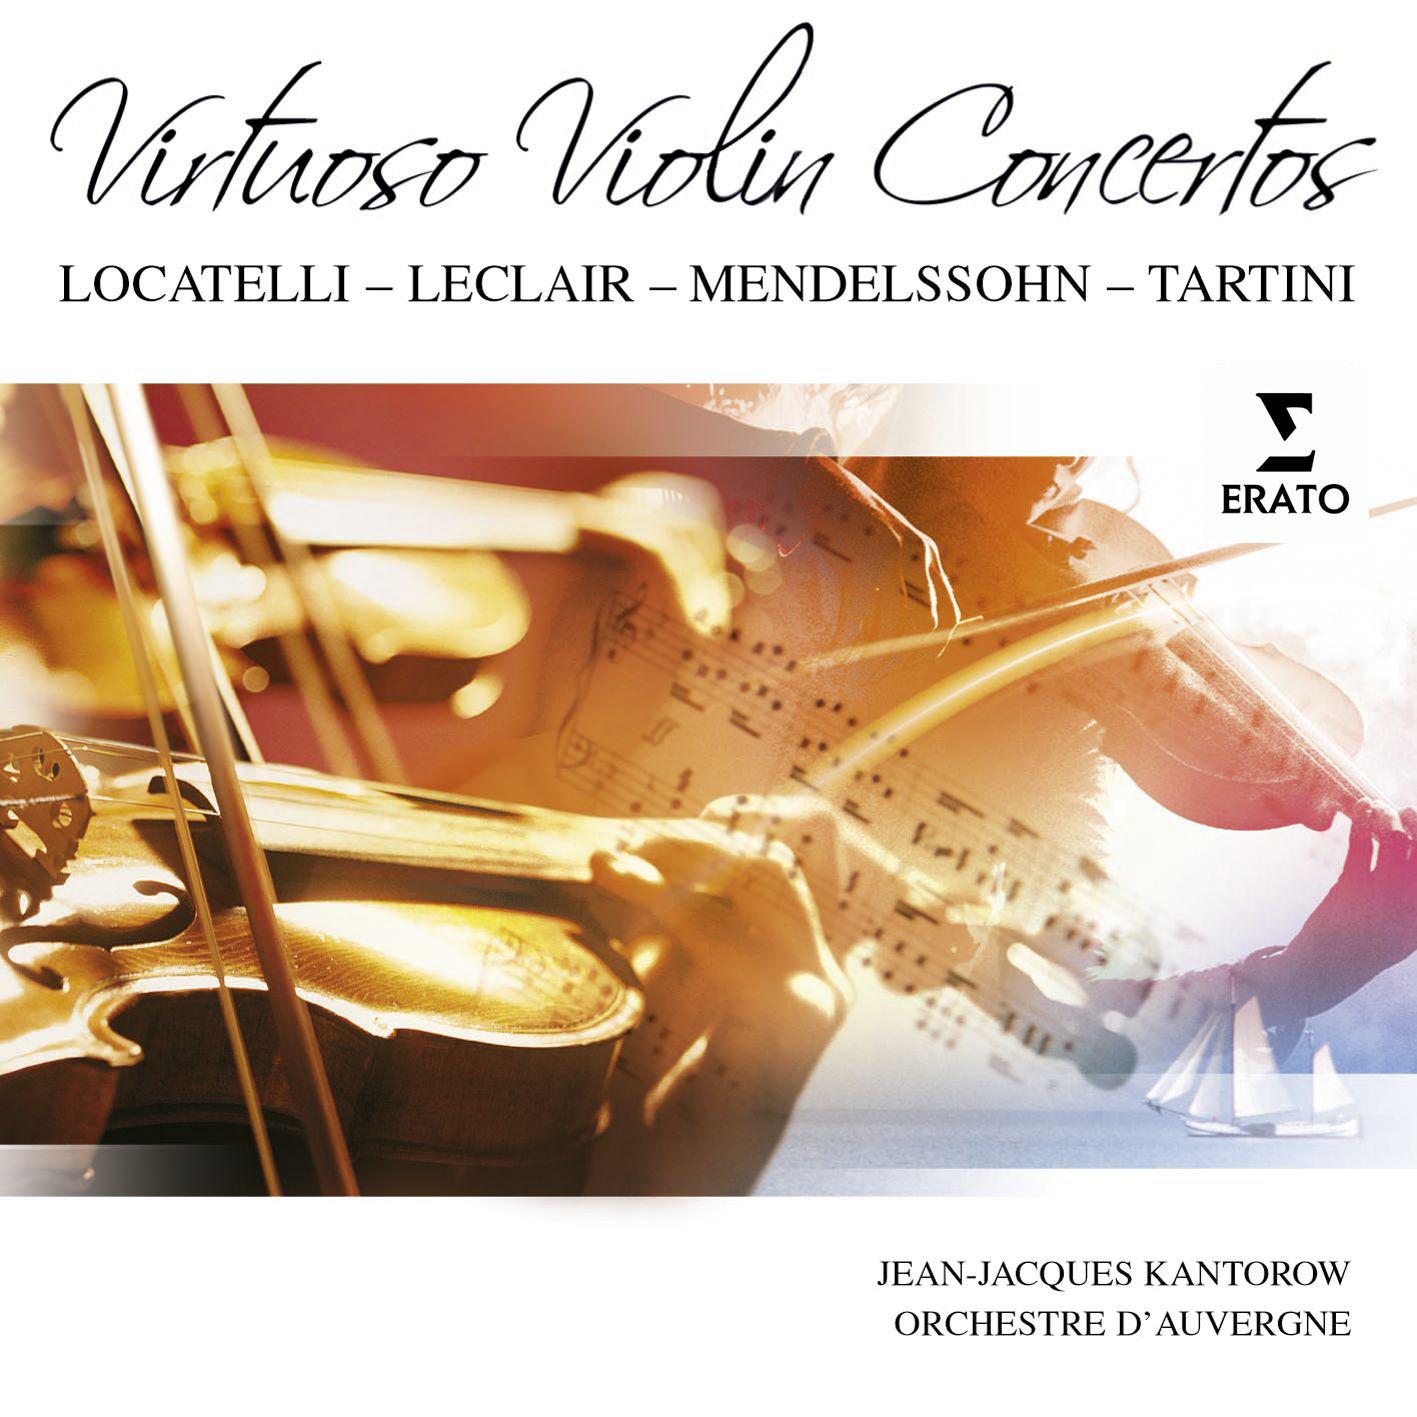 Concerto for Violin and Strings in D Minor, MWV O3: III. Allegro